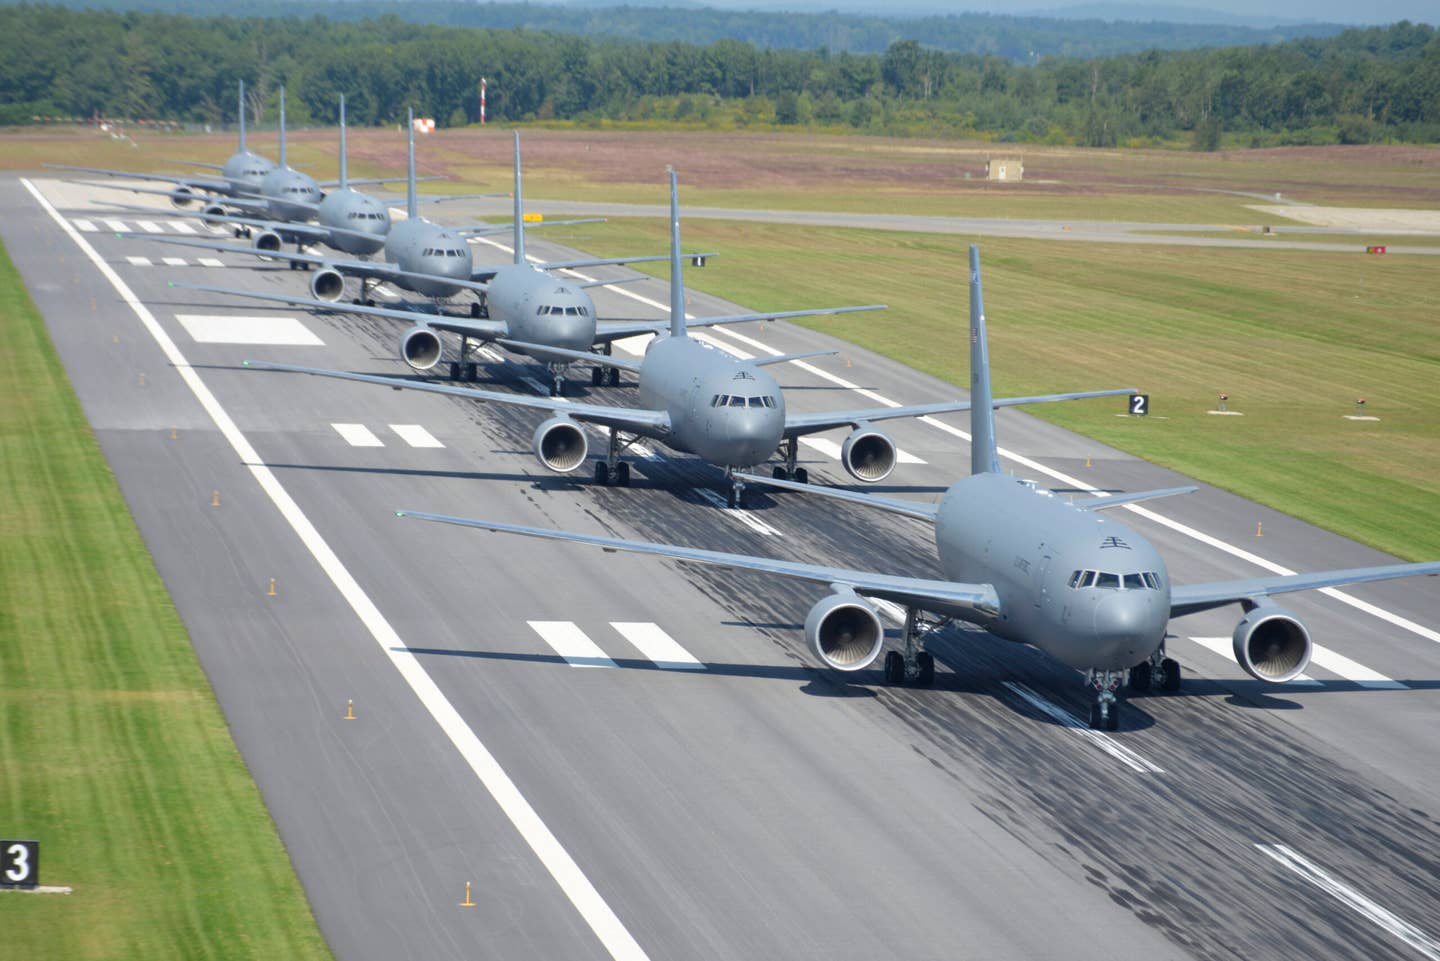 KC-46A aircraft assigned to the 157th Air Refueling Wing perform an elephant walk formation on the runway at Pease Air National Guard Base, Sept. 8, 2021.